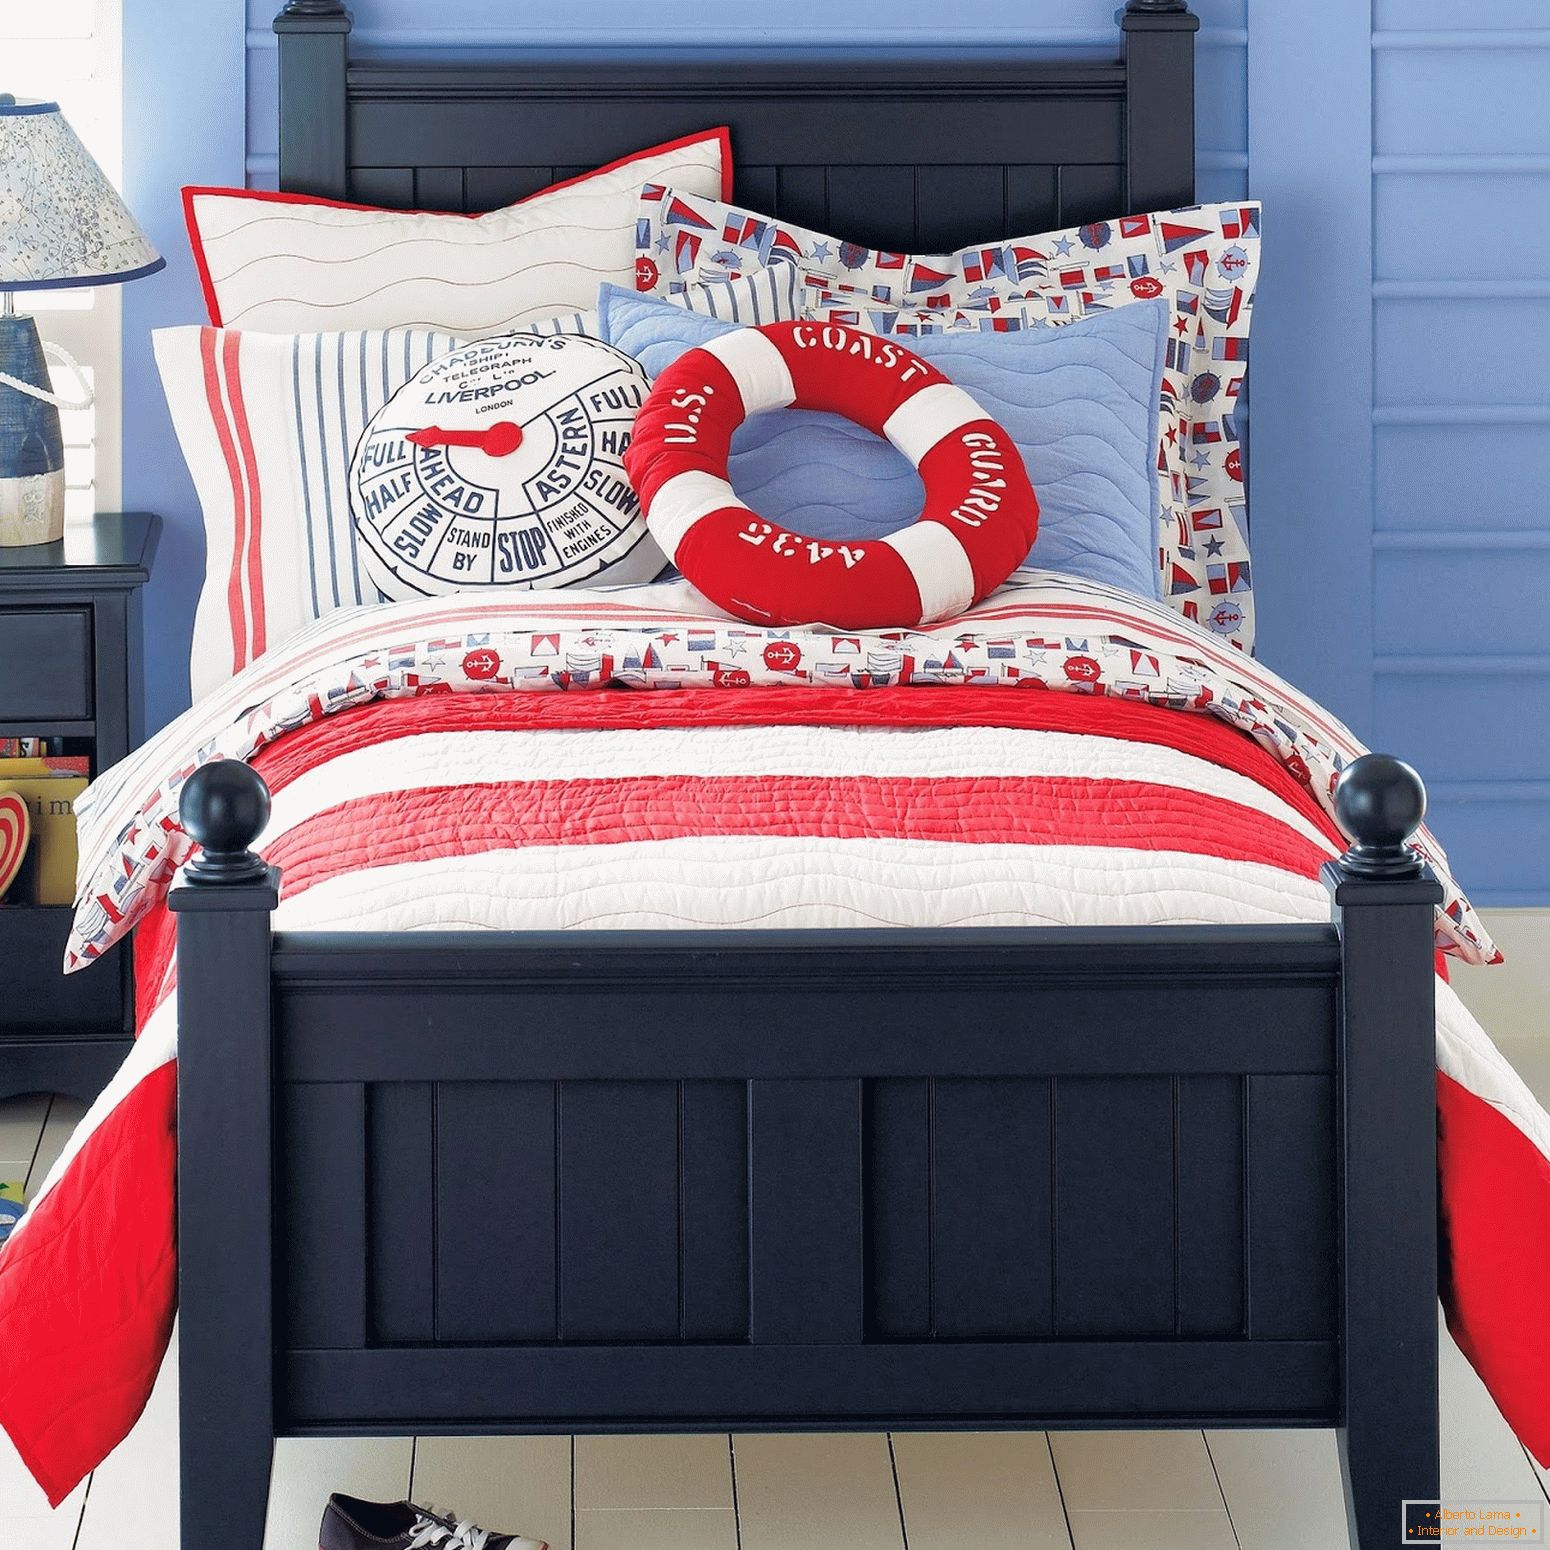 A bed for a sailor's boy